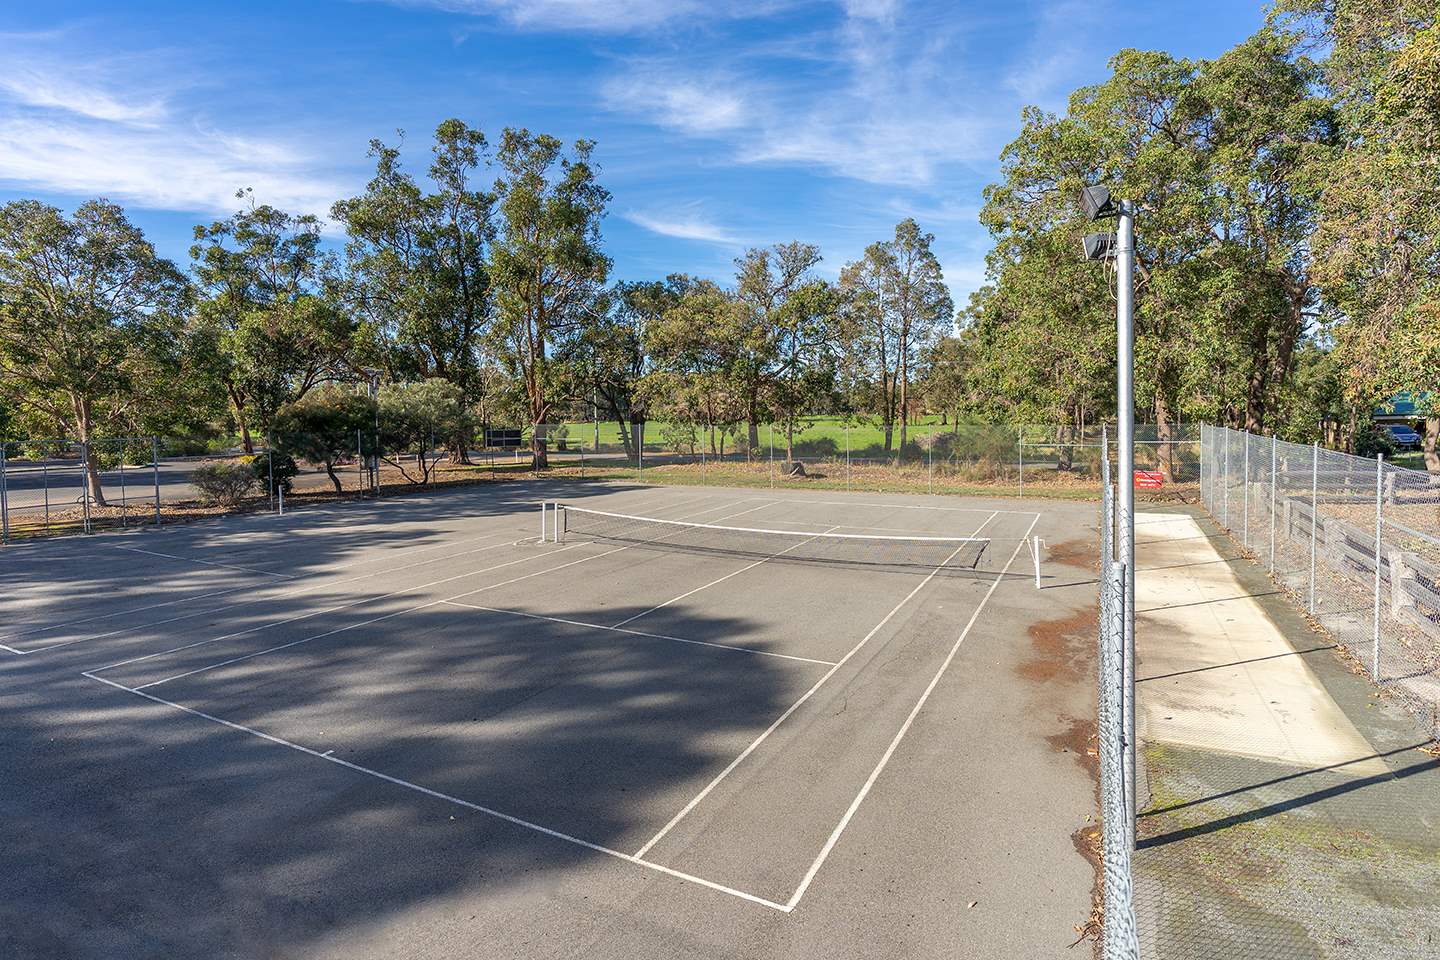 Coolup Tennis Courts